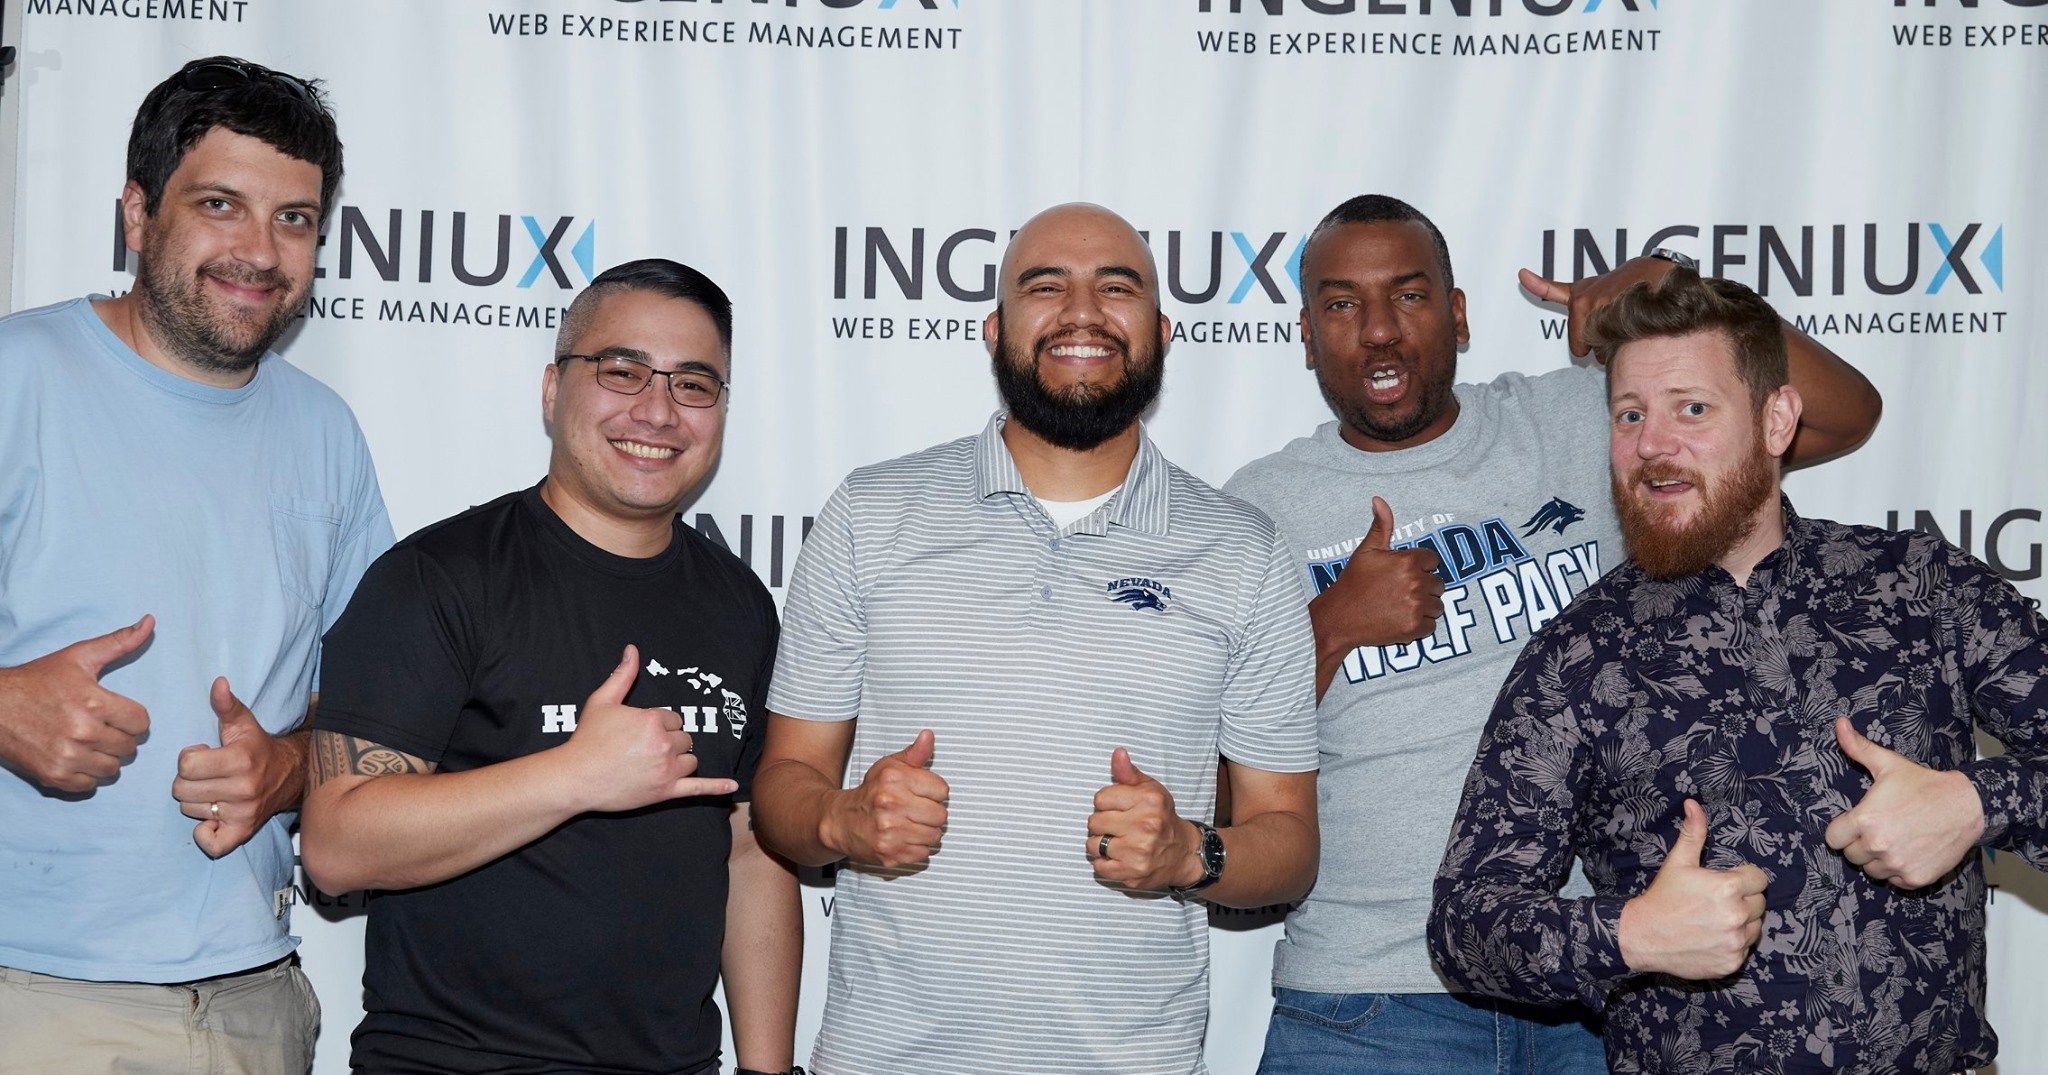 Ingeniux Blog Here’s What 7 Attendees Had to Say About Their Time at the Ingeniux User Conference 